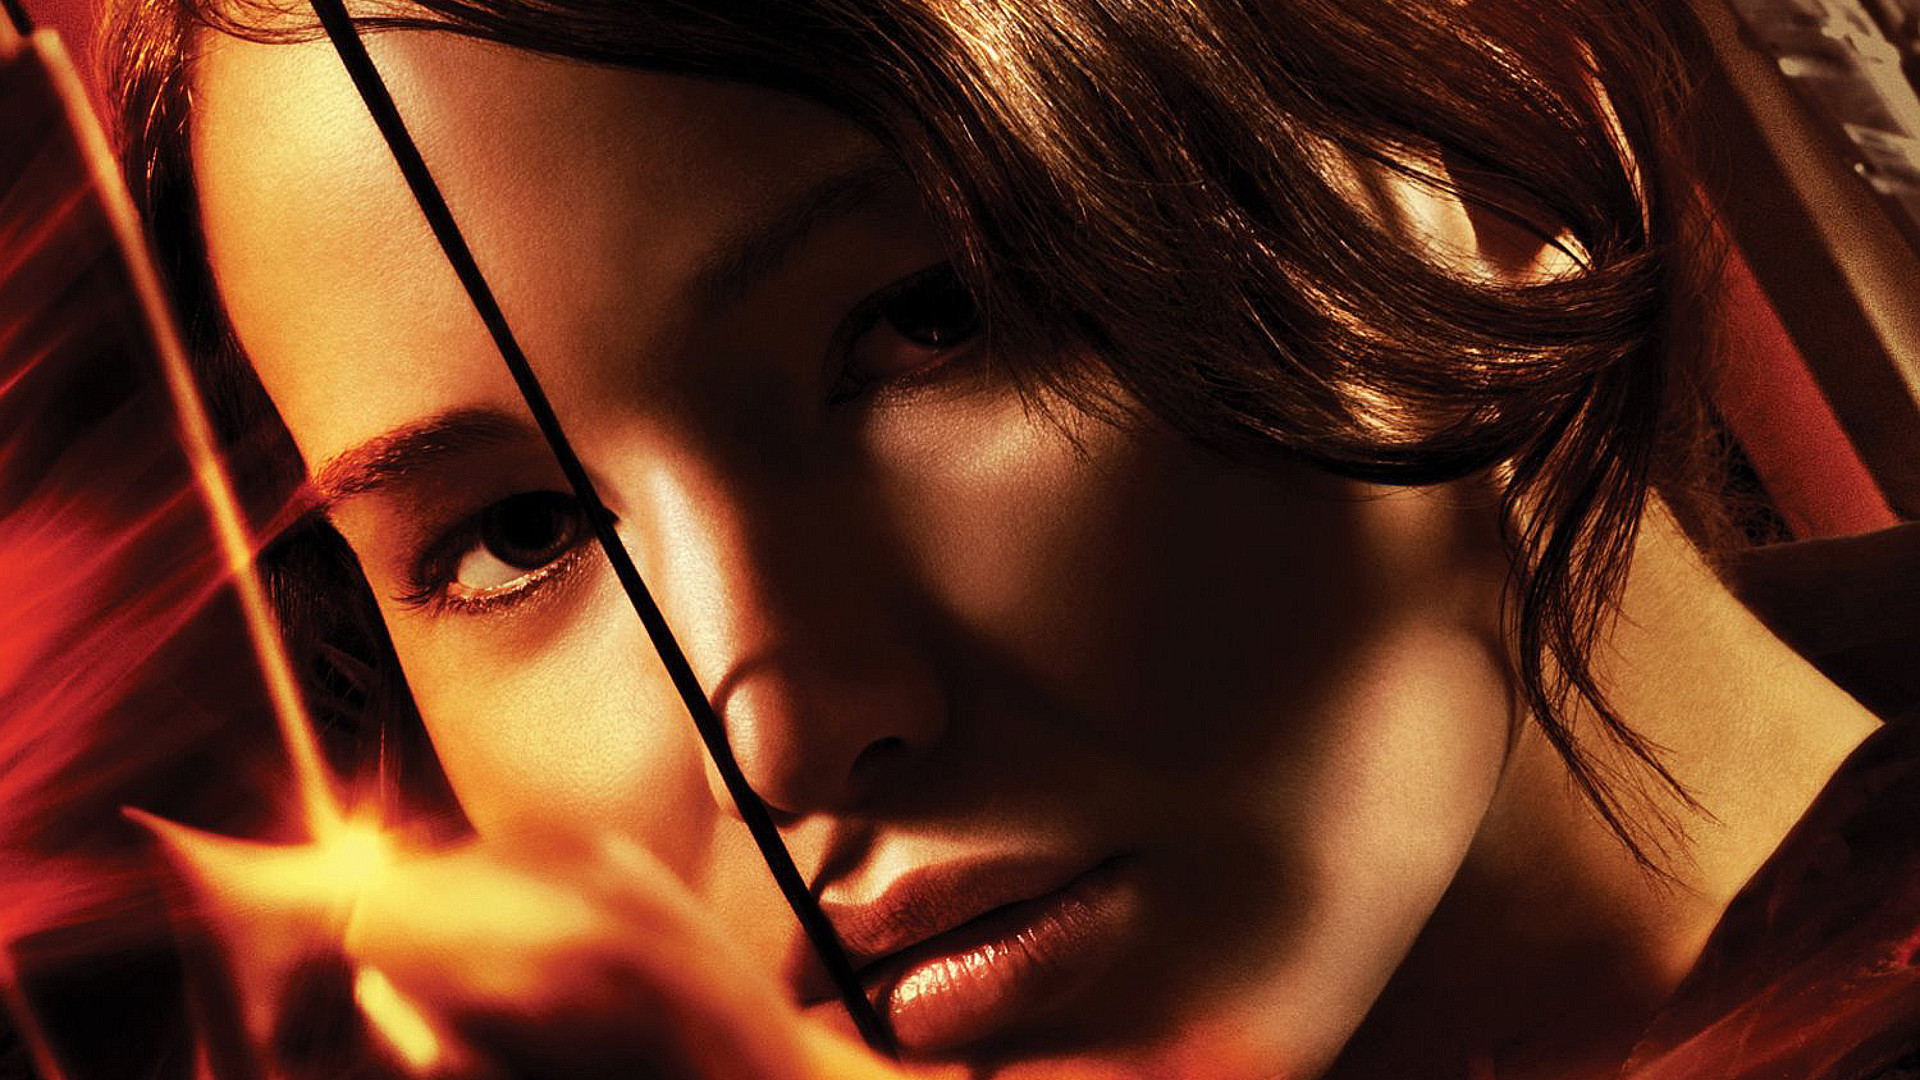 Jennifer Lawrence in Hunger Games Wallpapers HD Wallpapers 1920x1080